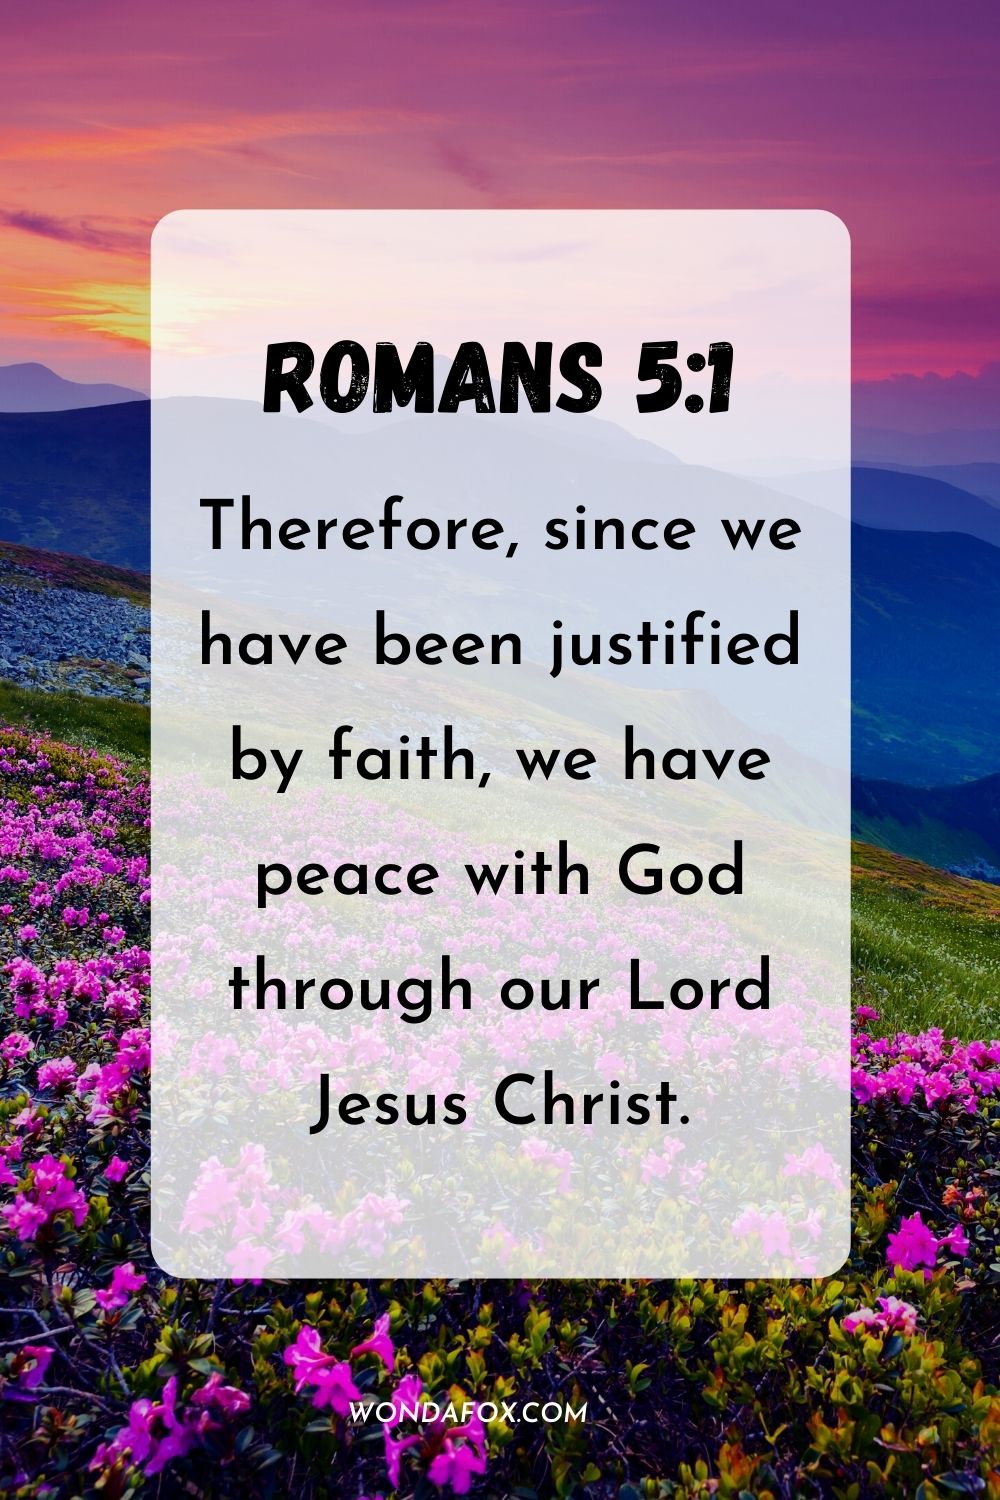 Therefore, since we have been justified by faith, we have peace with God through our Lord Jesus Christ. Romans 5:1